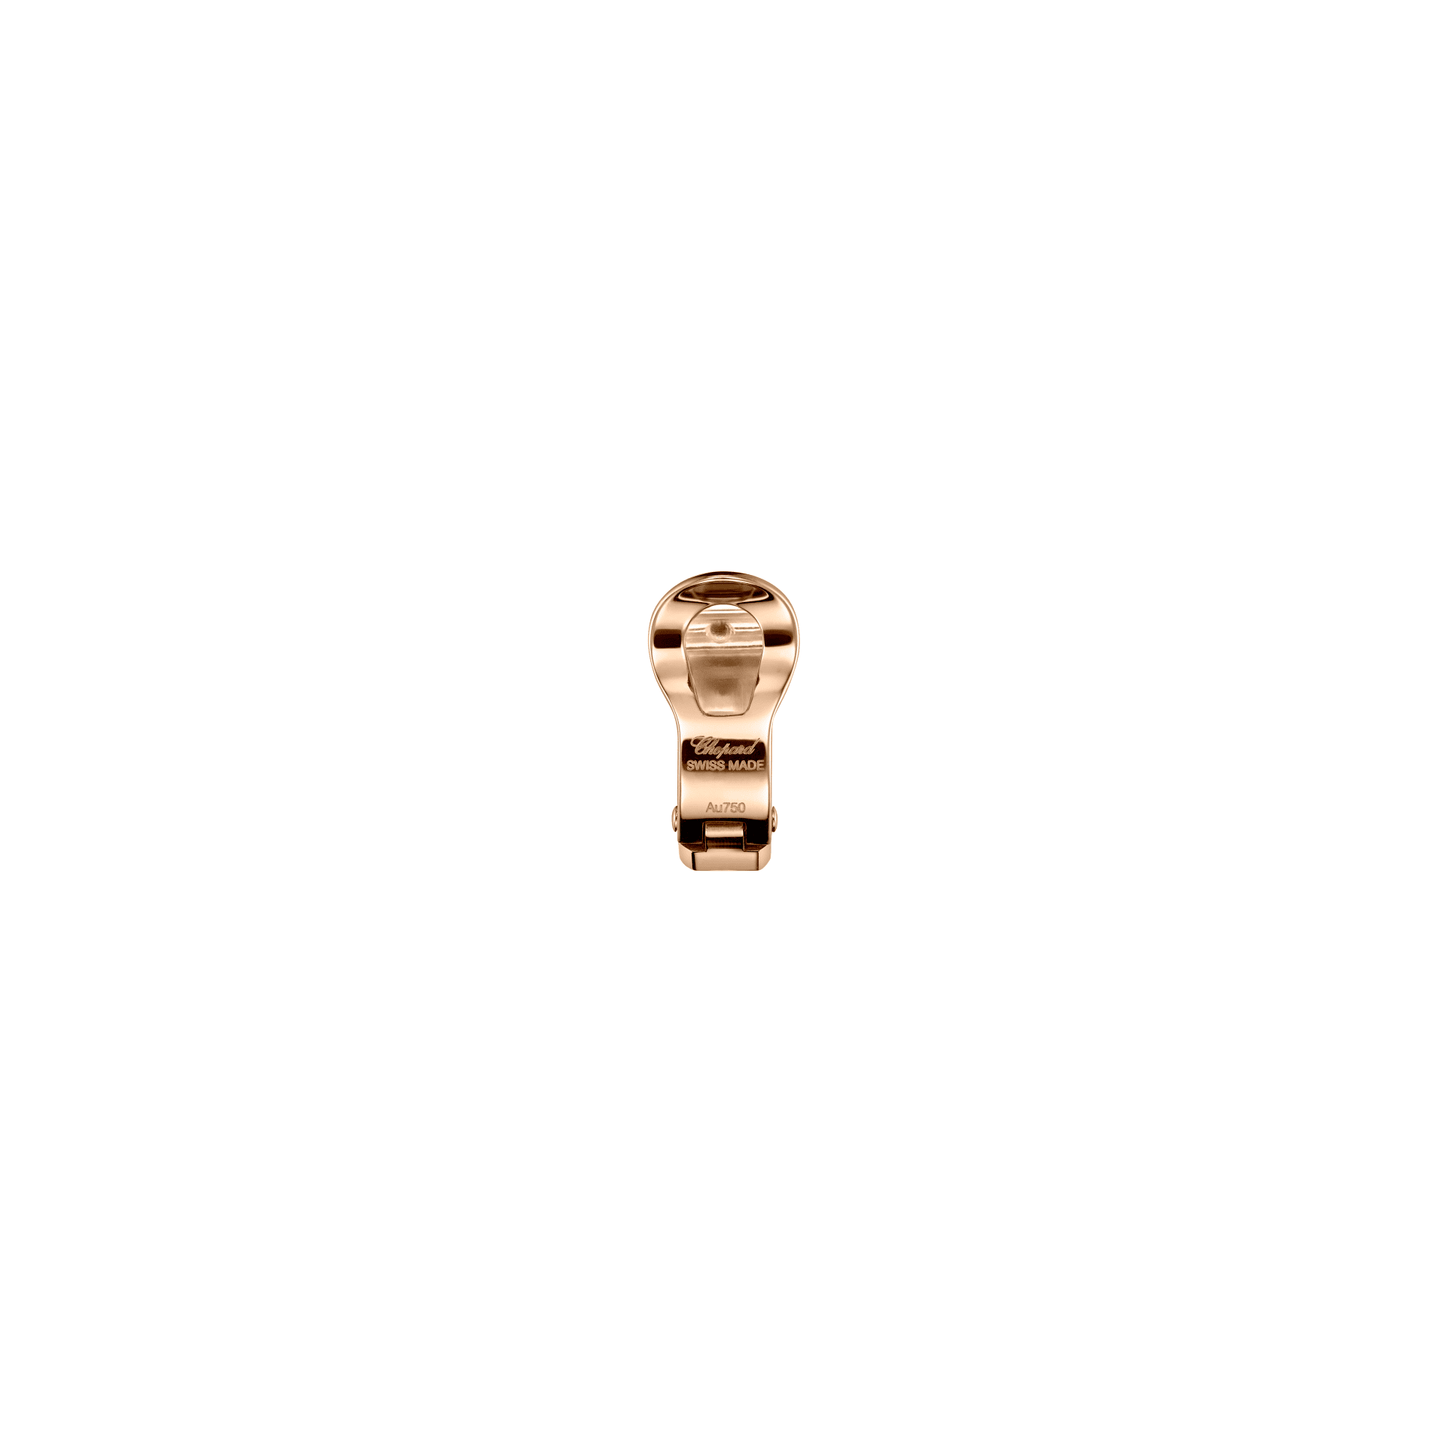 ICE CUBE SINGLE CLIP-ON, ETHICAL YELLOW GOLD 849834-0001